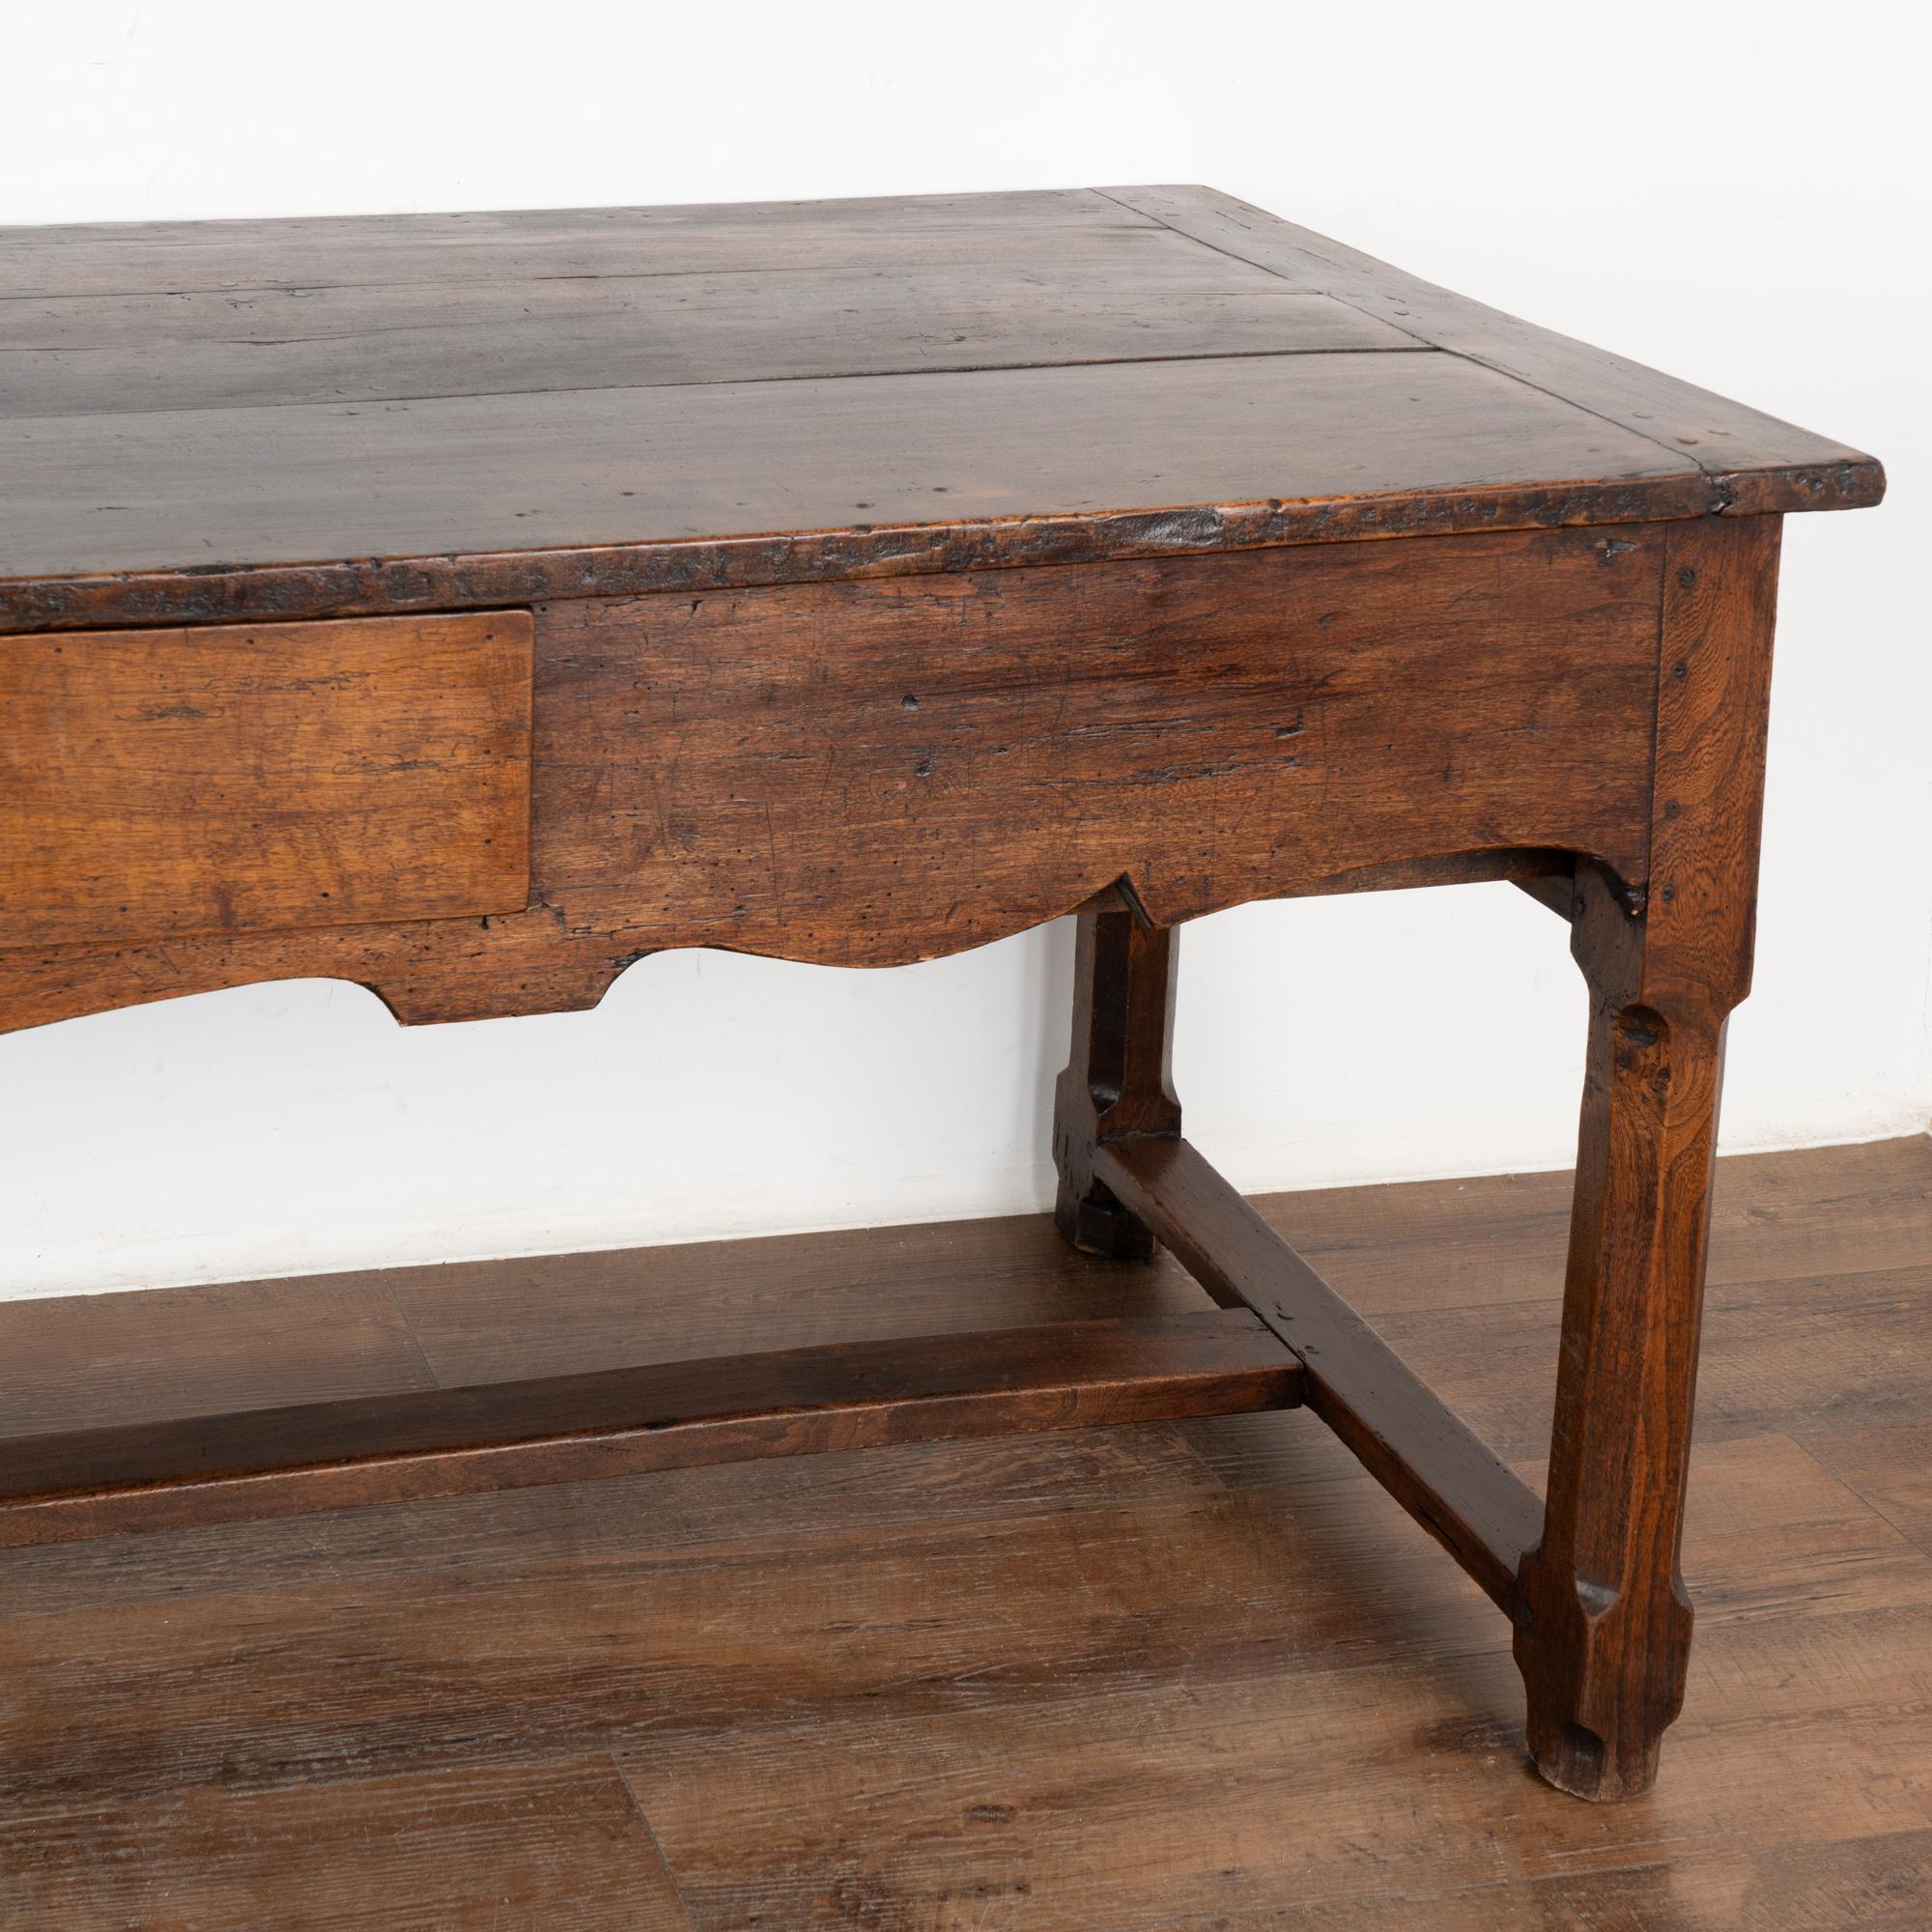 Antique French Console Table With Drawers, circa 1800-40 5